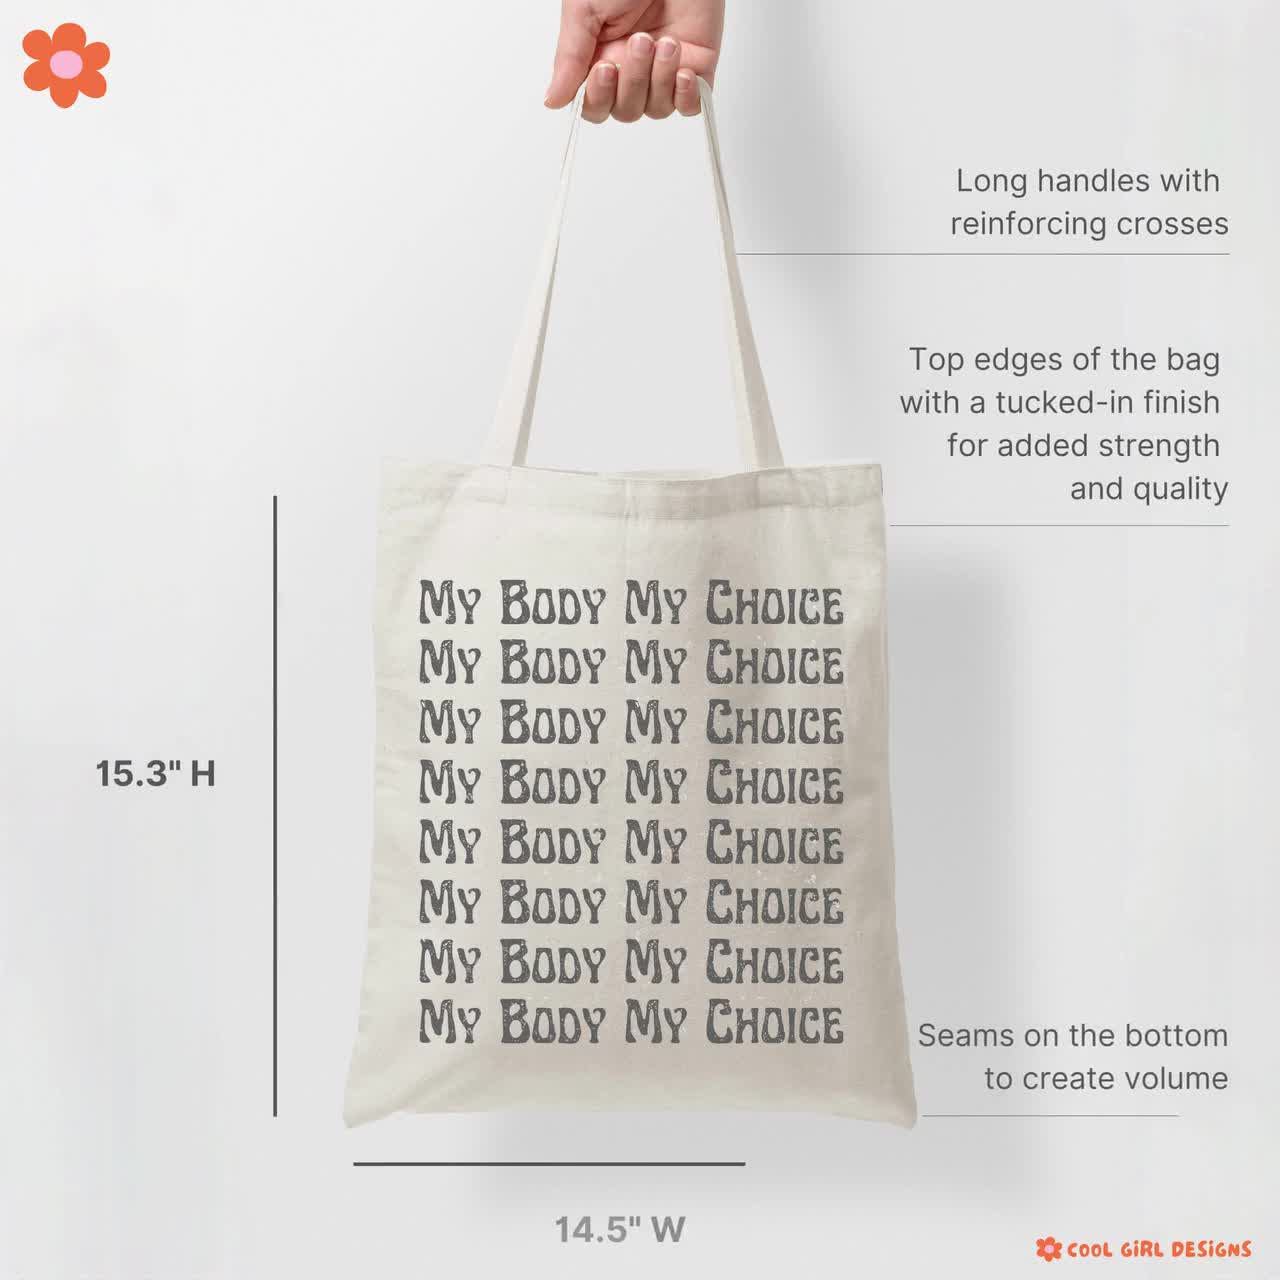 Respect Women's Bodies Tote Bag / My Body My Choice Pro 